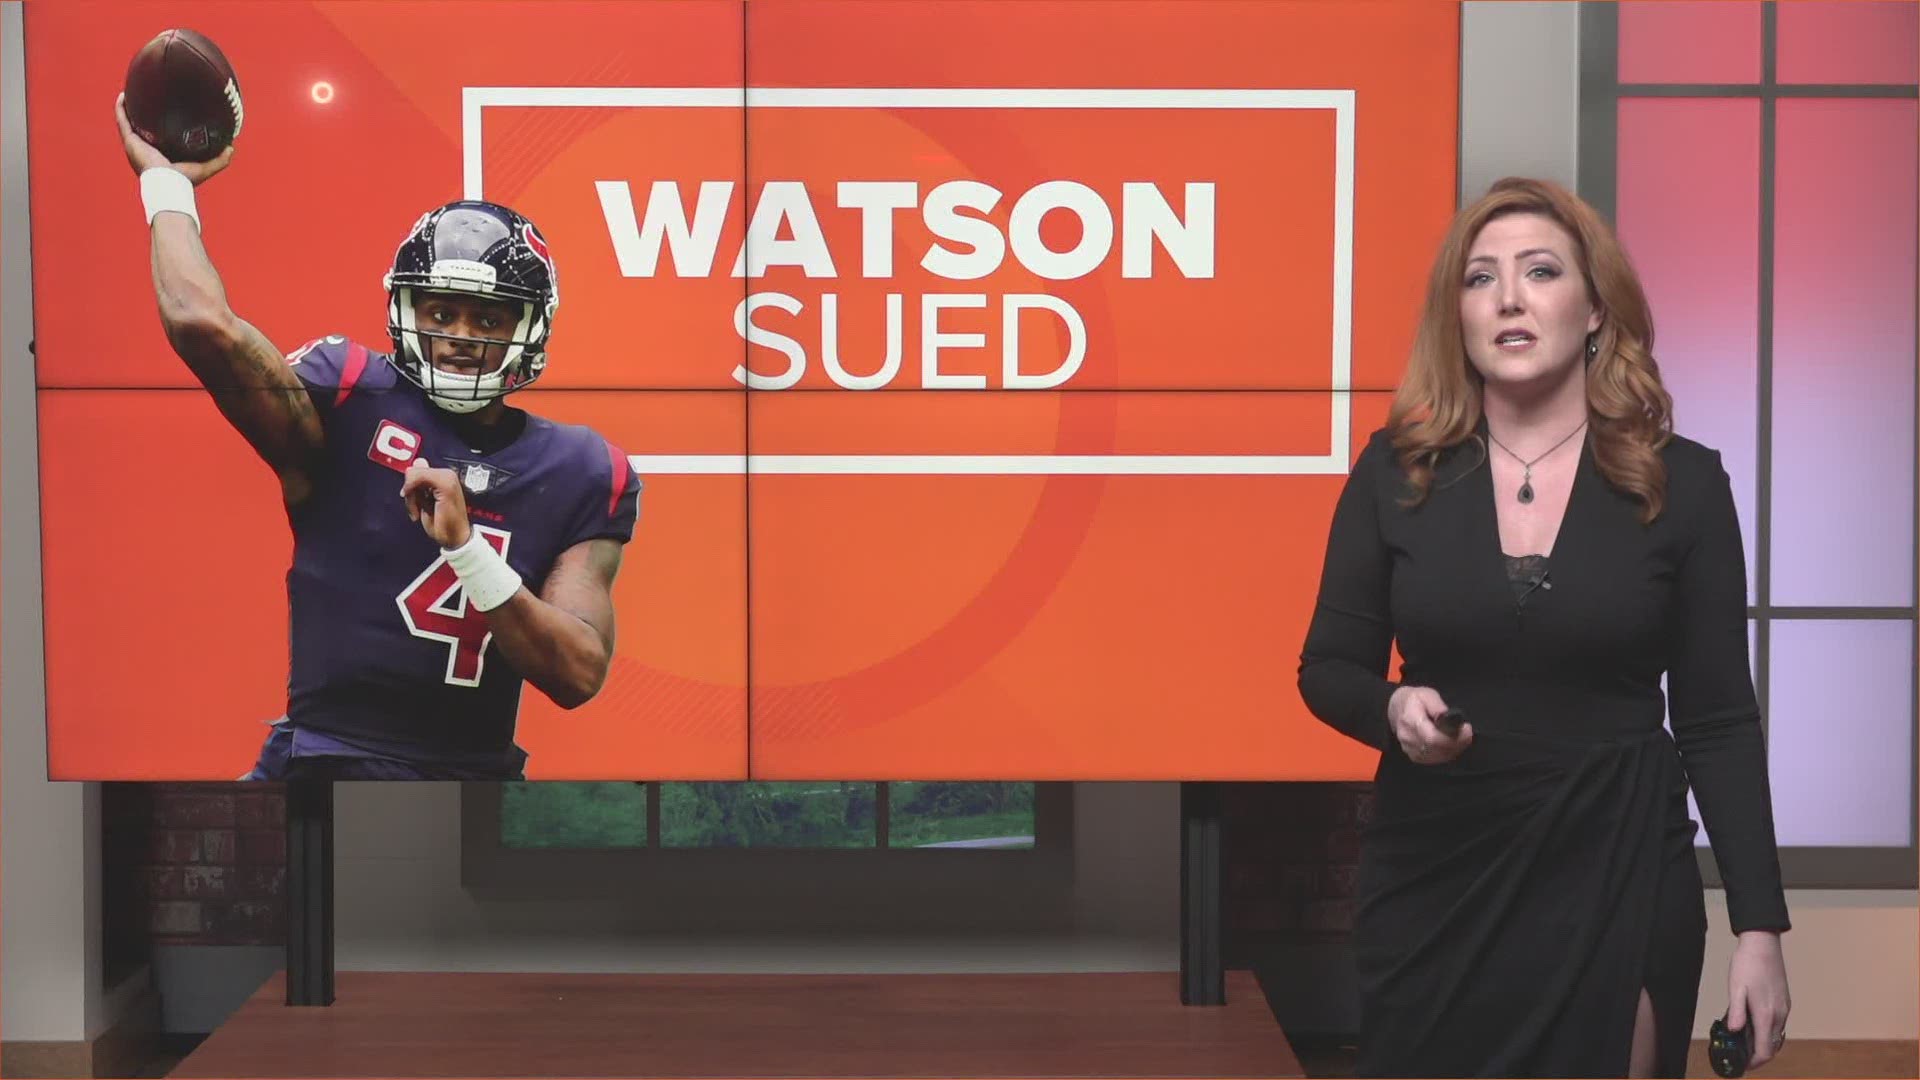 Houston attorney Tony Buzbee said he is now filing a third lawsuit against Texans quarterback Deshaun Watson over alleged assault claims from massage therapists.